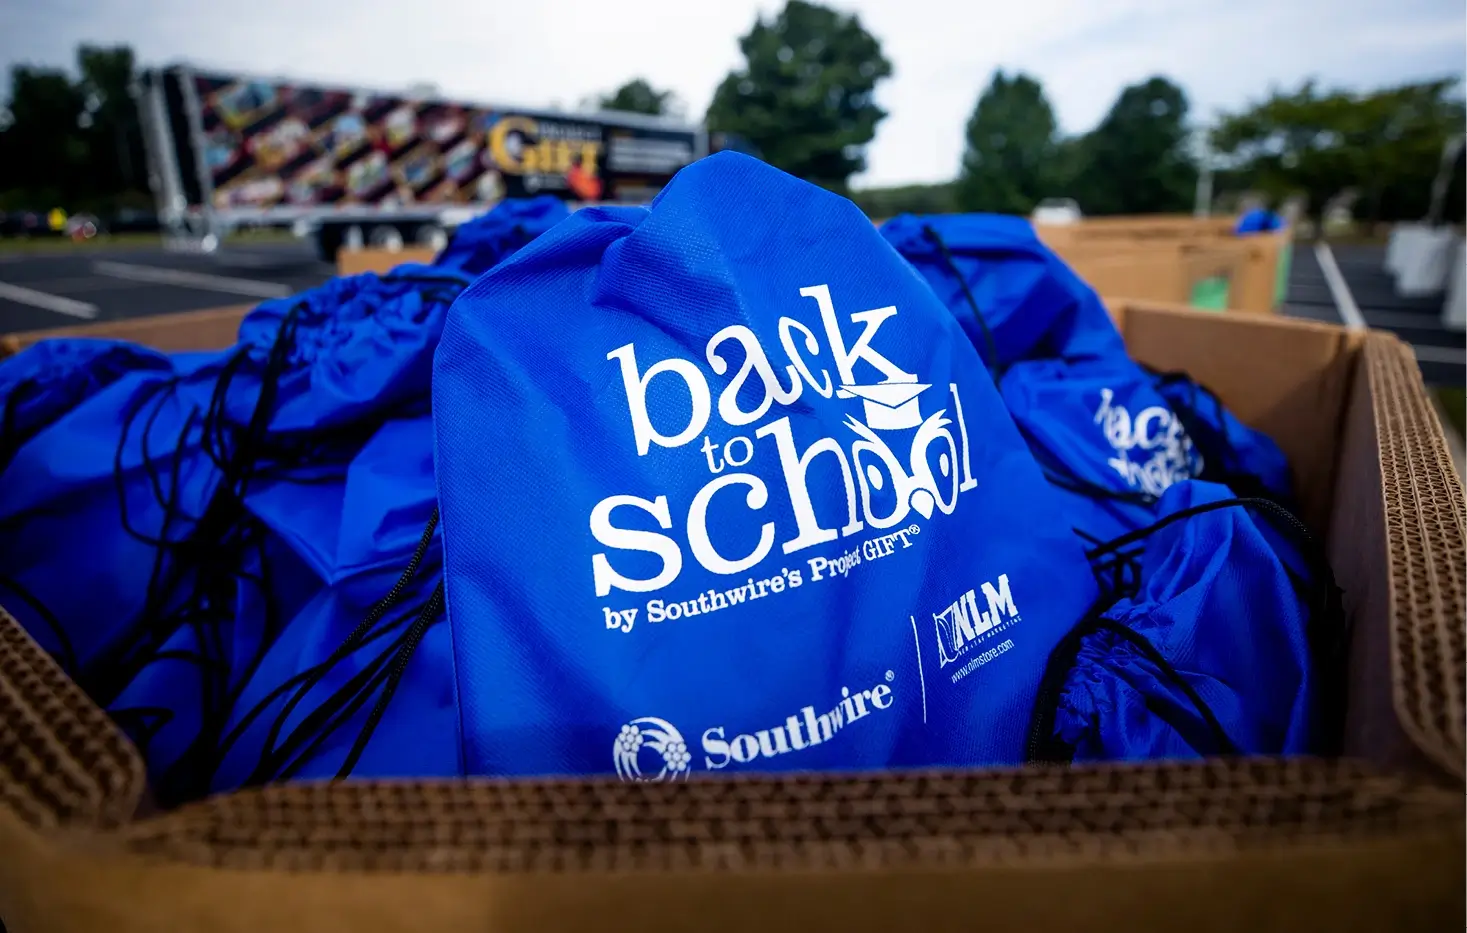 Southwire Hosts Back to School Giveaway in Villa Rica, Ga.